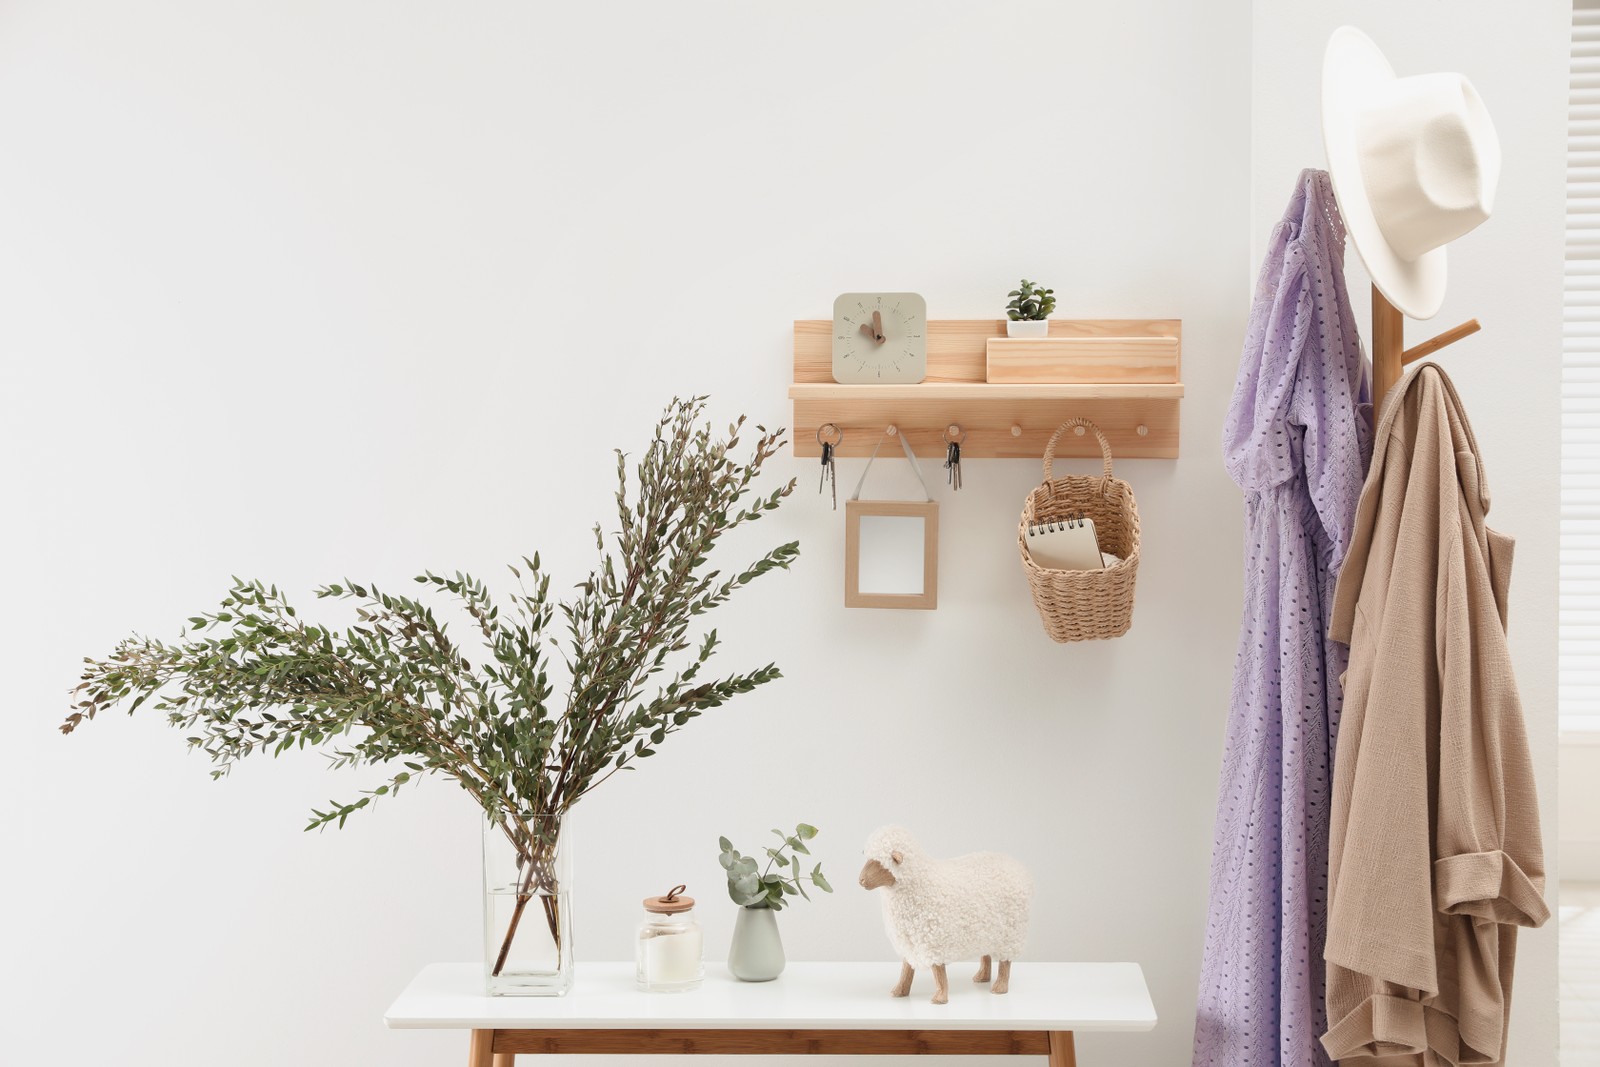 Photo of wooden clothes rack and key holder on white wall in hallway